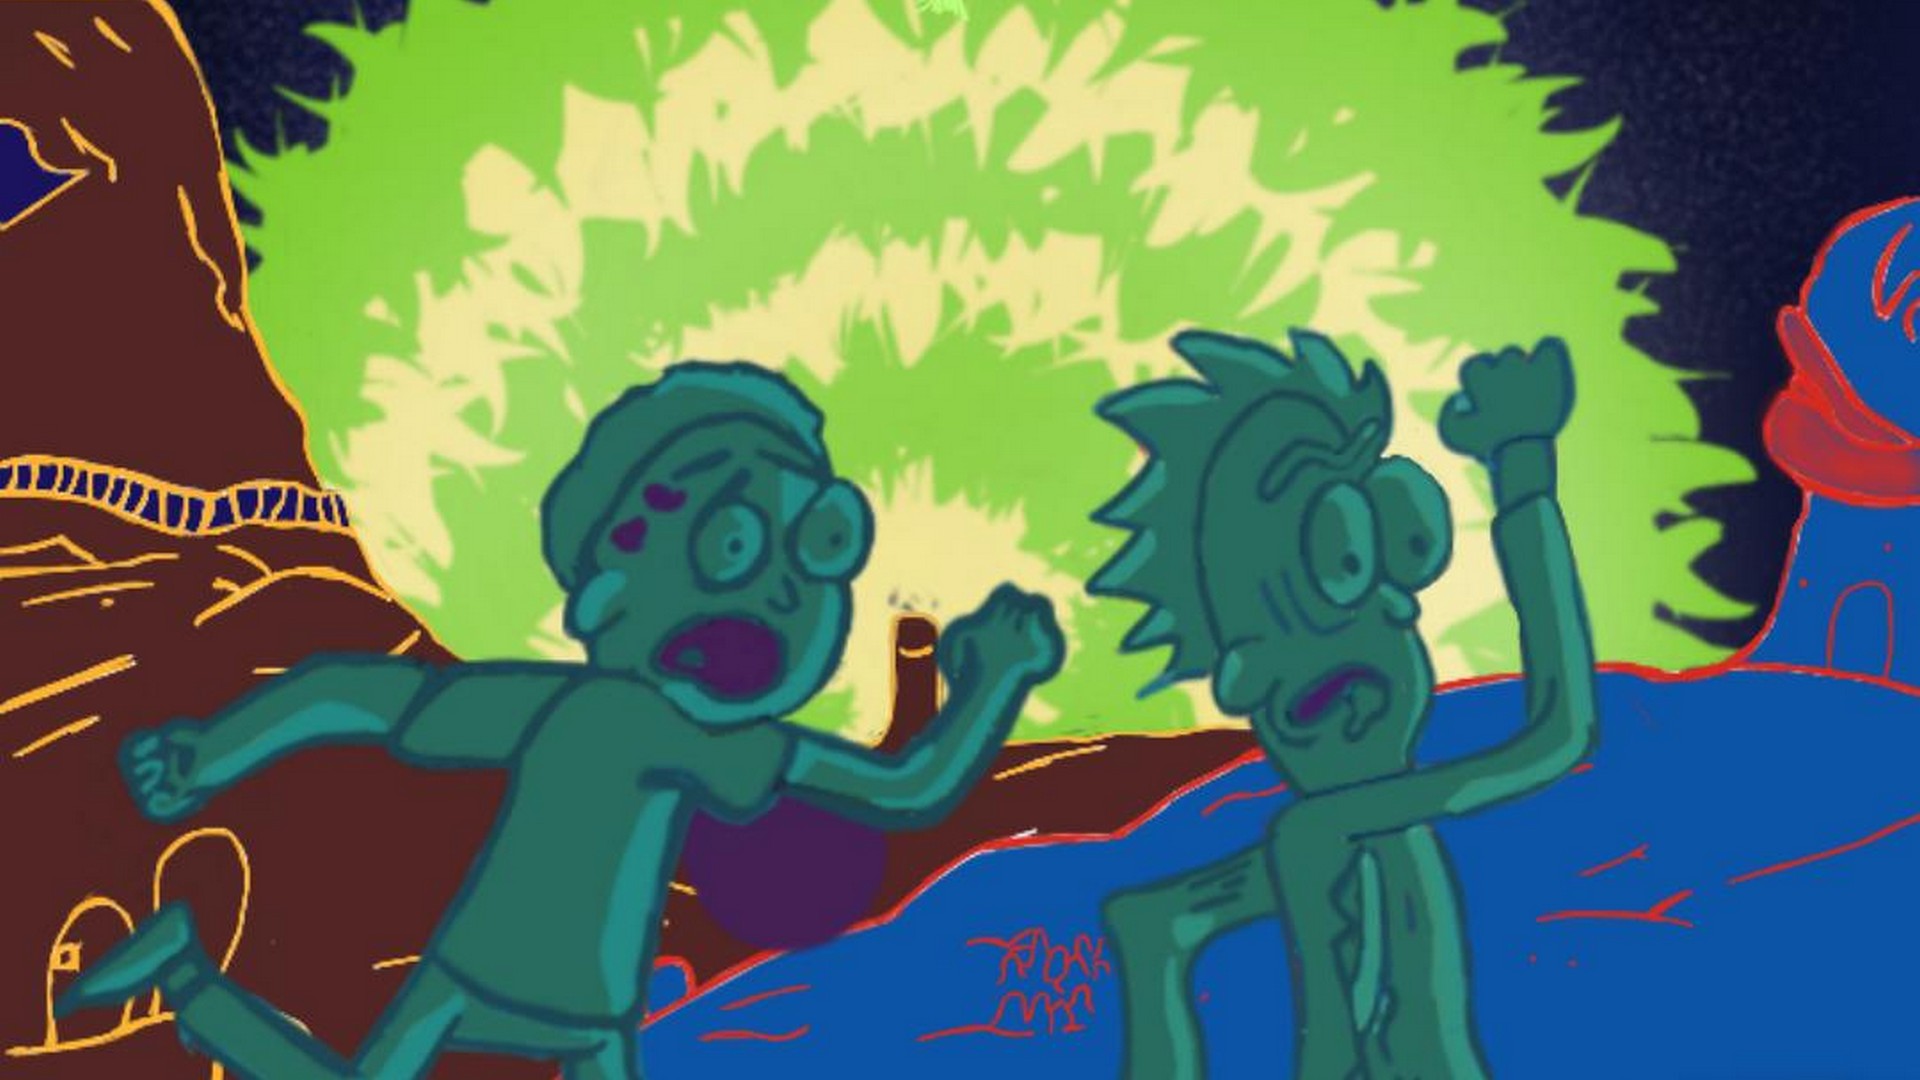 Best New Rick and Morty Wallpaper with resolution 1920X1080 pixel. You can use this wallpaper as background for your desktop Computer Screensavers, Android or iPhone smartphones